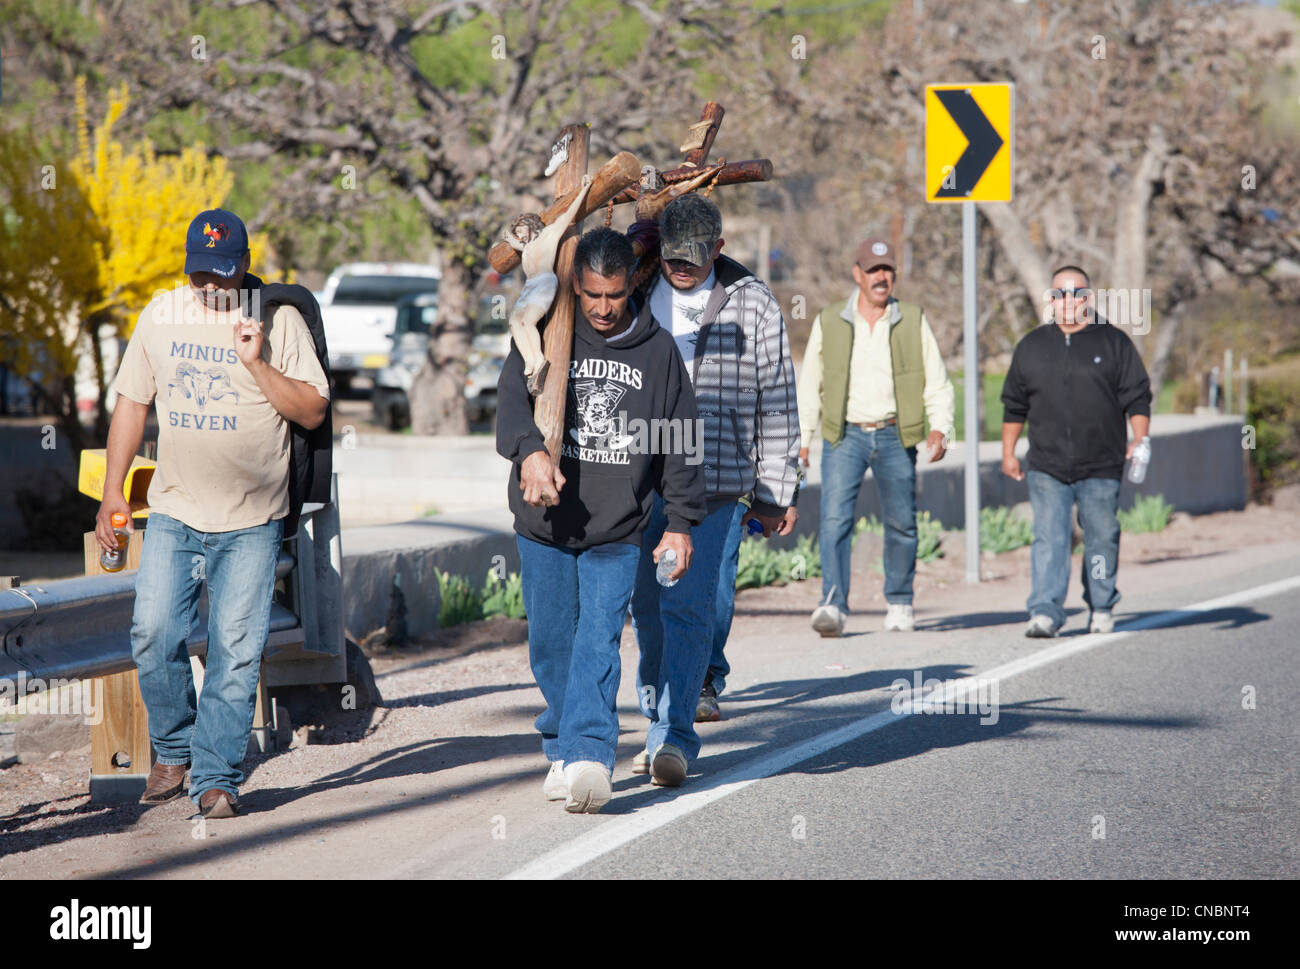 Pilgrim carrying a cross on his way to the Chimayo Sanctuary, New Mexico, during the Easter week. Stock Photo